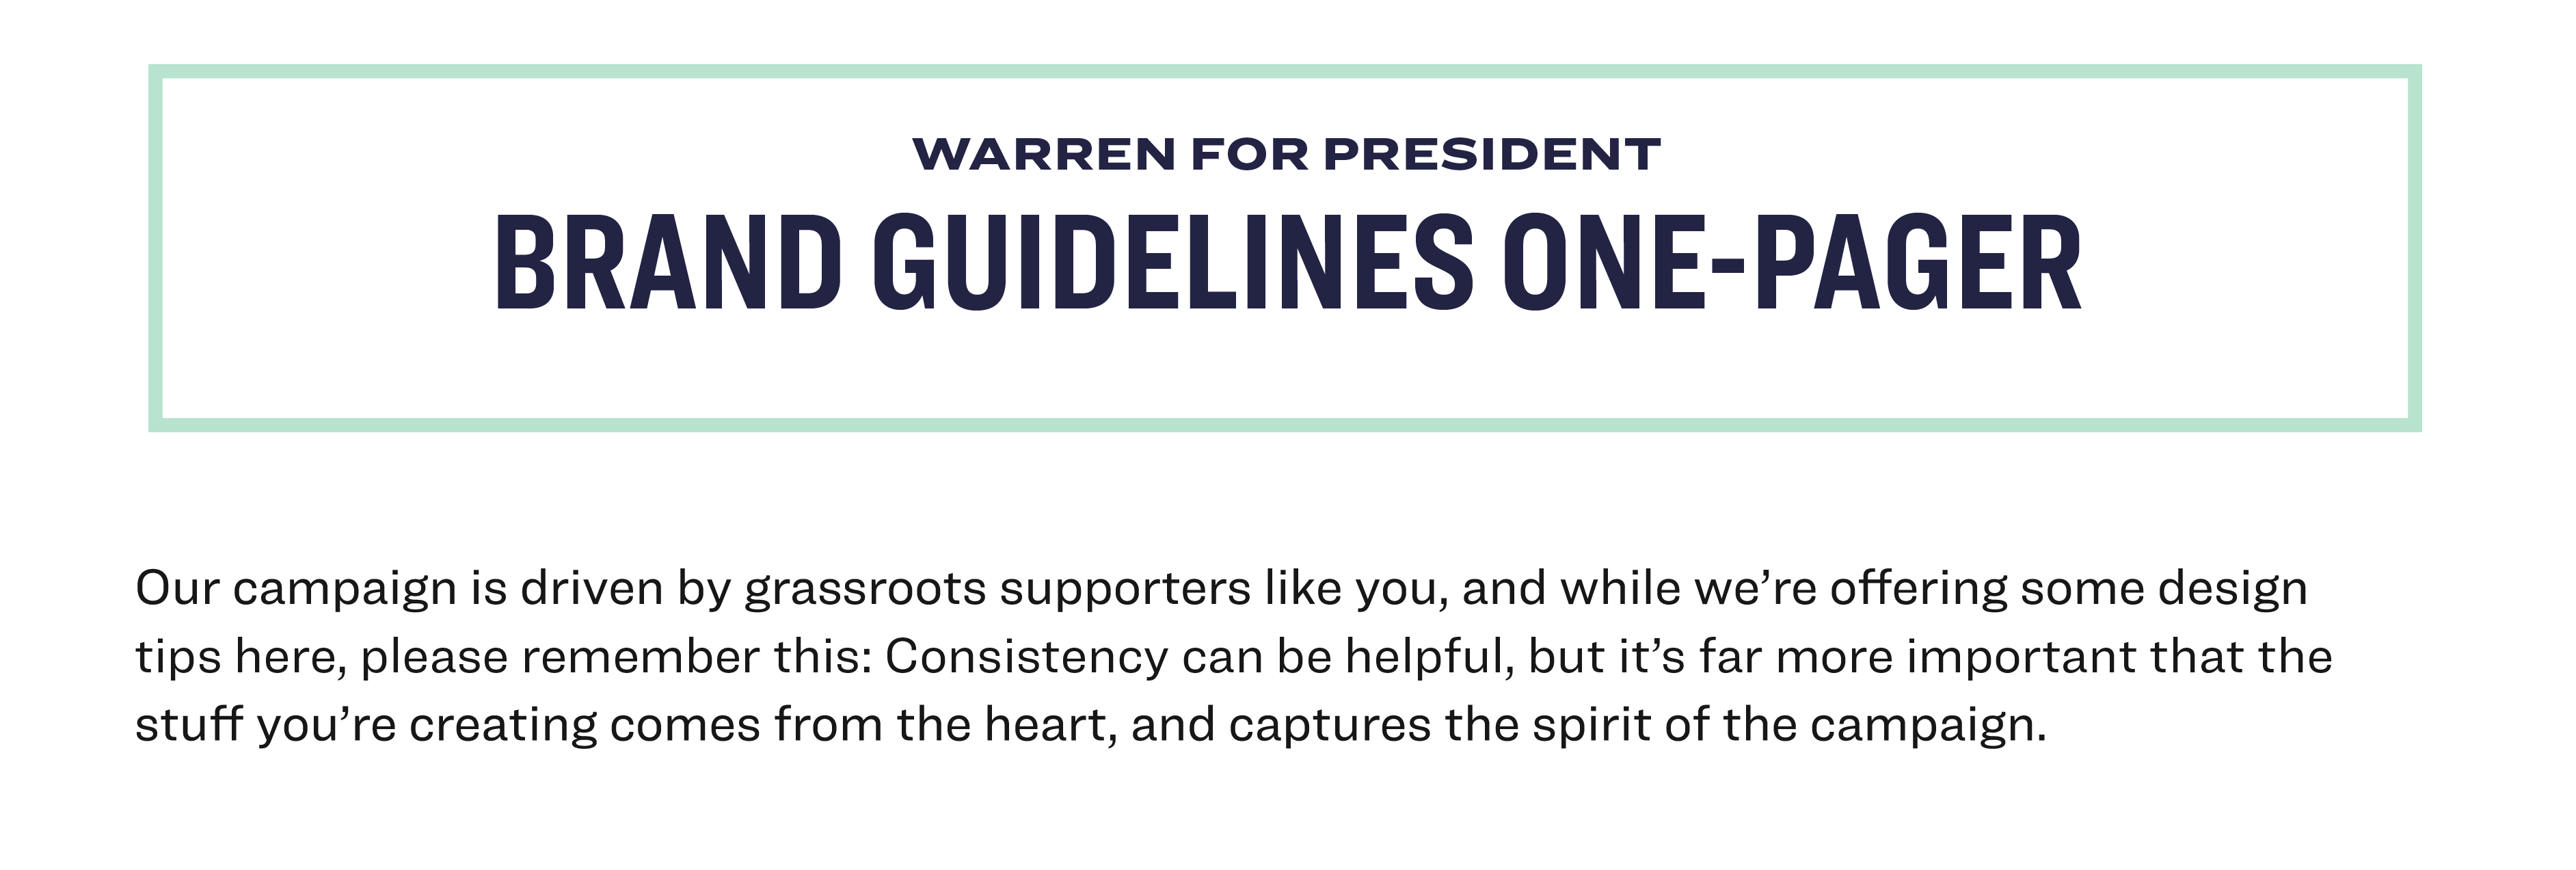 Warren for President Brand Guidelines, detailing the design tips that were put in the hands of supporters. 